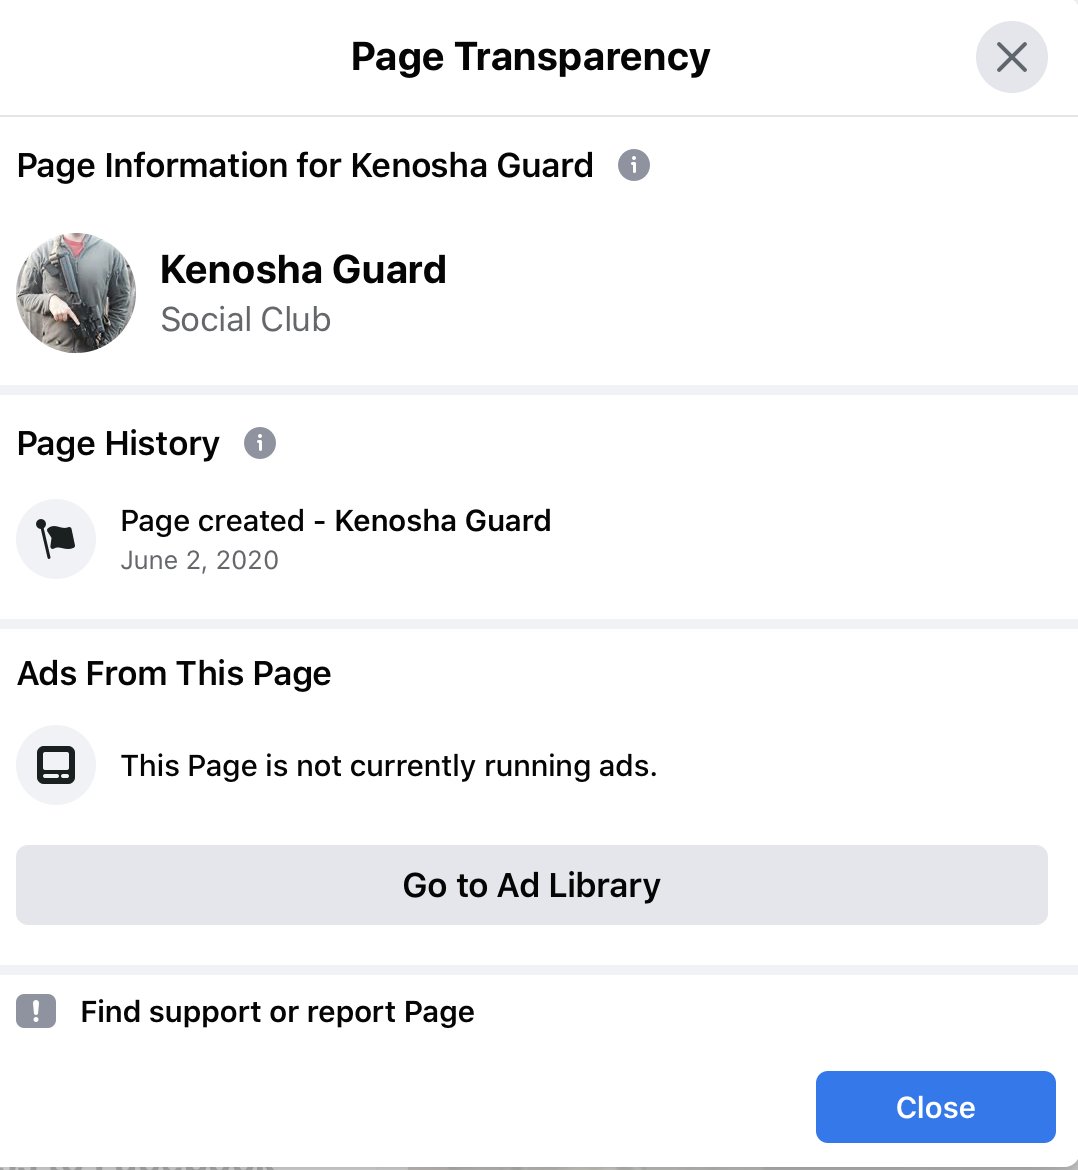 On the 'Kenosha Guard' Facebook page, there is no info about who created it. You'd think Facebook would have more required transparency at this point.The only personal account I see associated with any of this is on the 'Organized by' for the event.